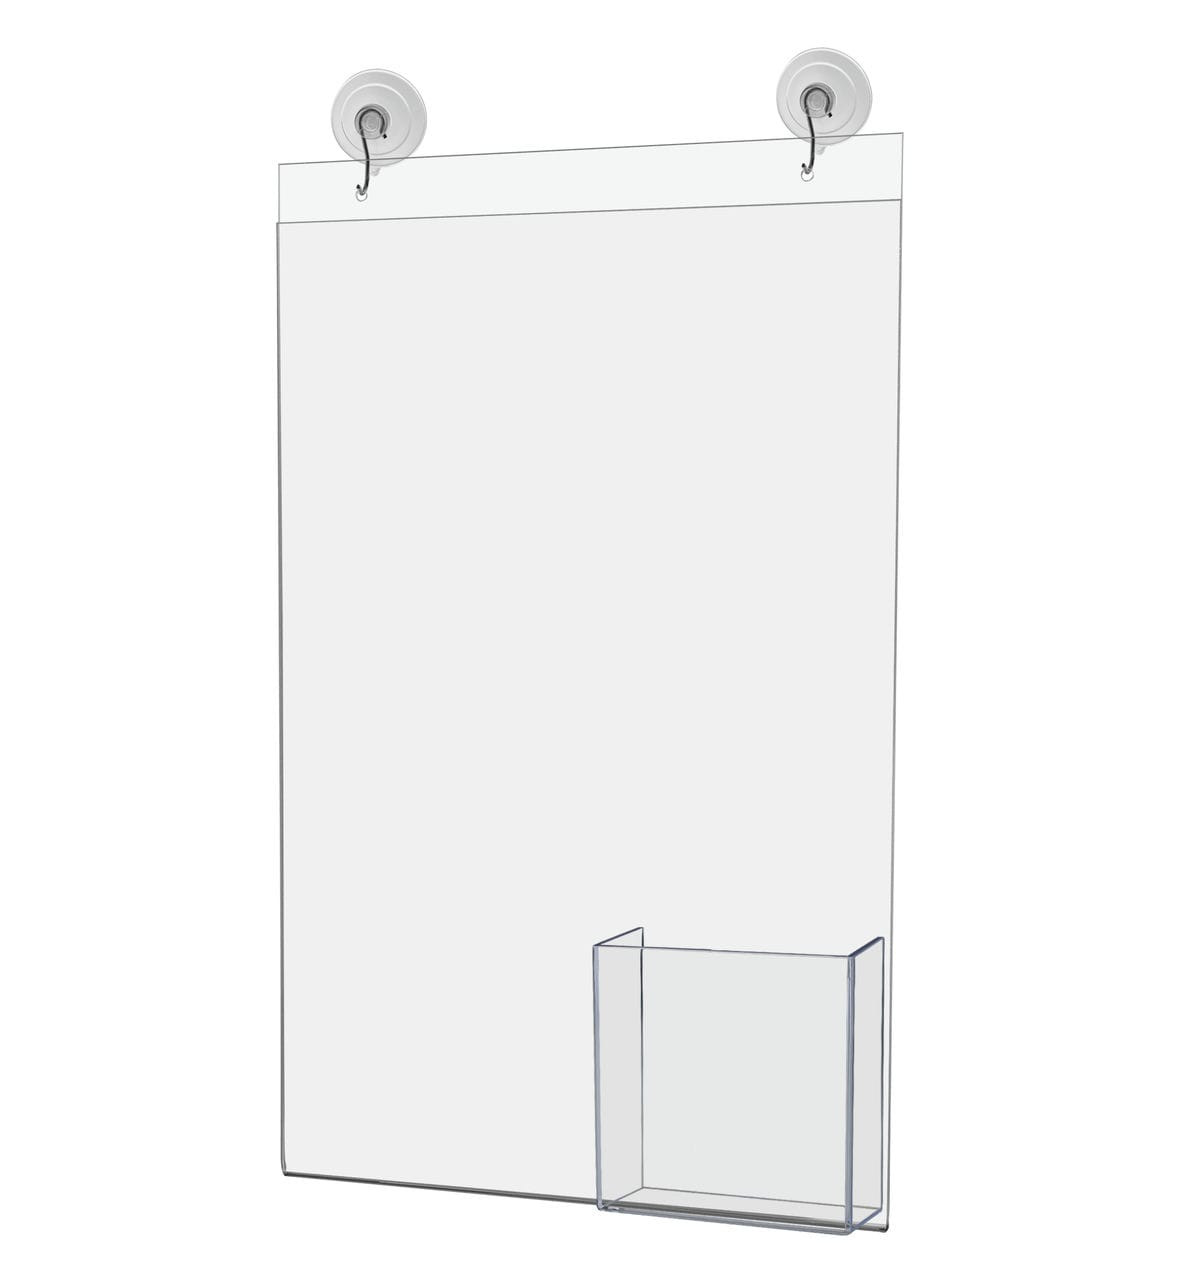 11”W x 17”H Sign Frame with Brochure Pocket and Suction Cups